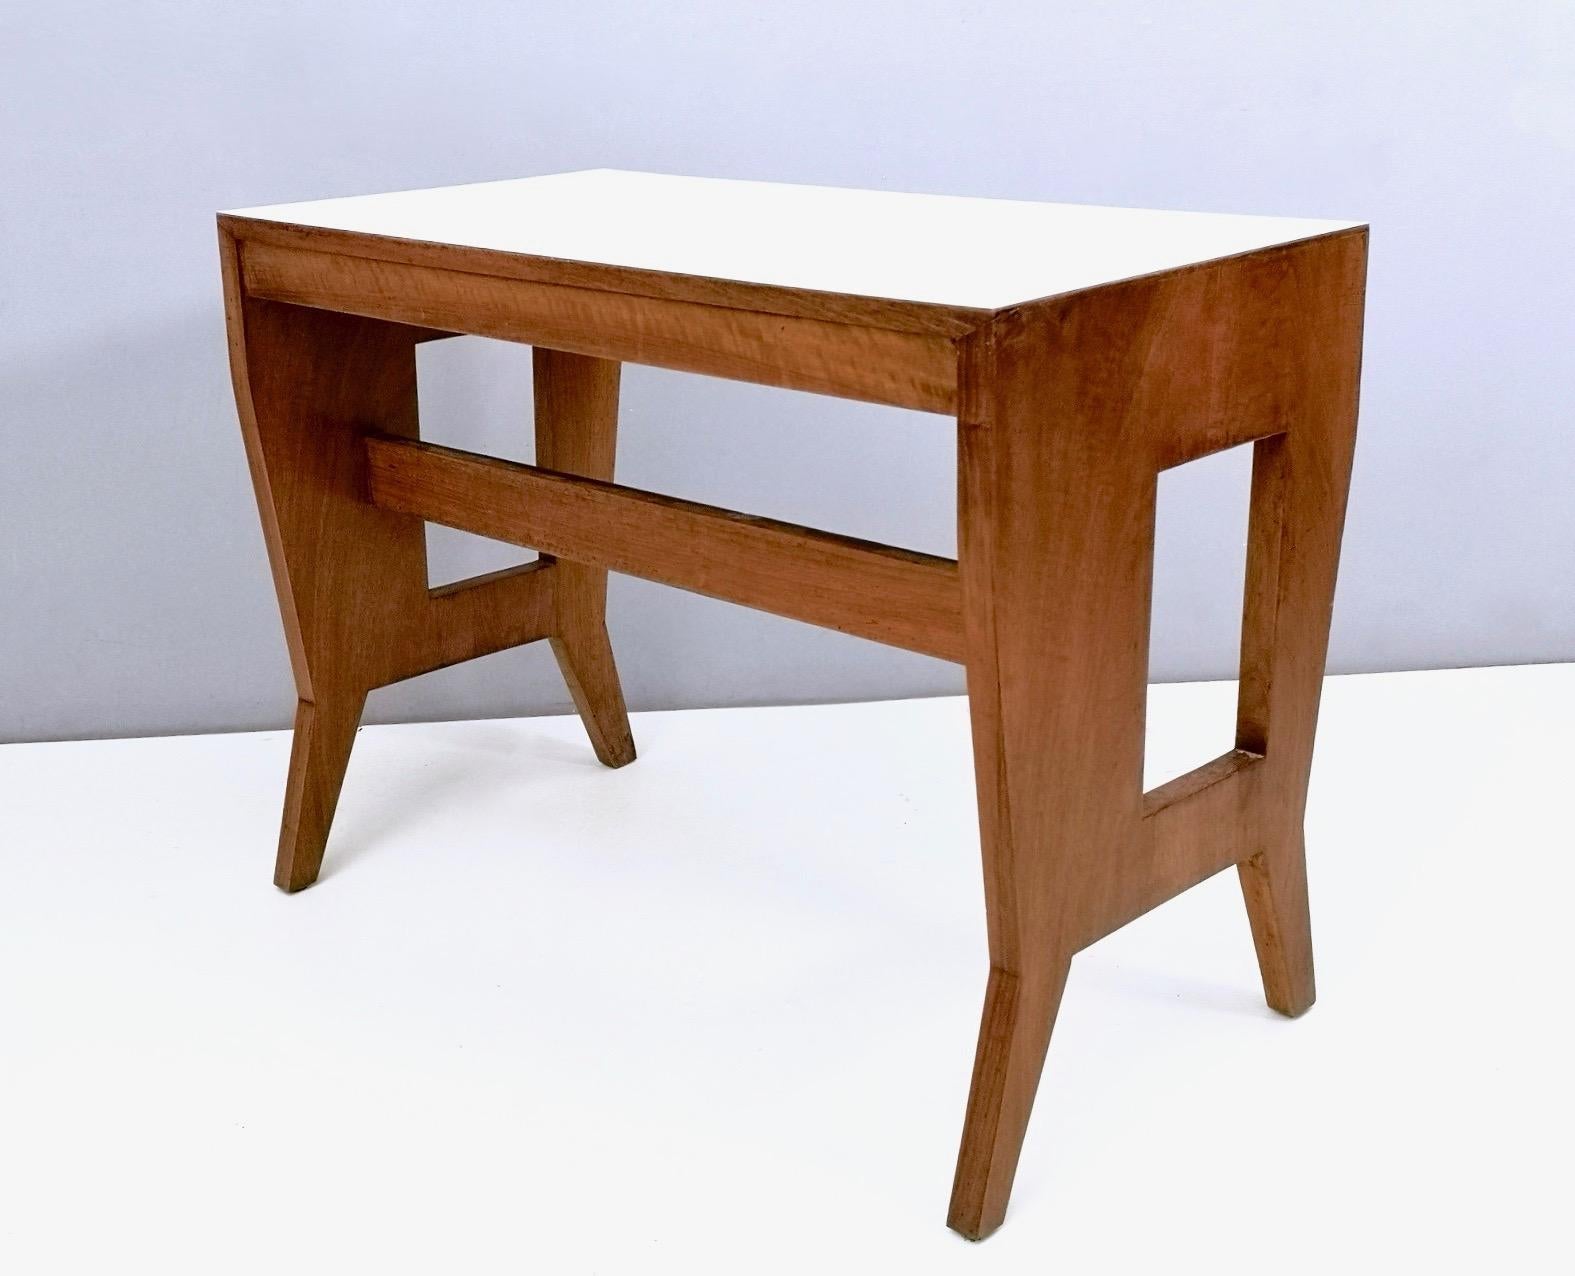 Formica Solid Walnut Writing Desk by Gio Ponti for the University of Padova, Italy